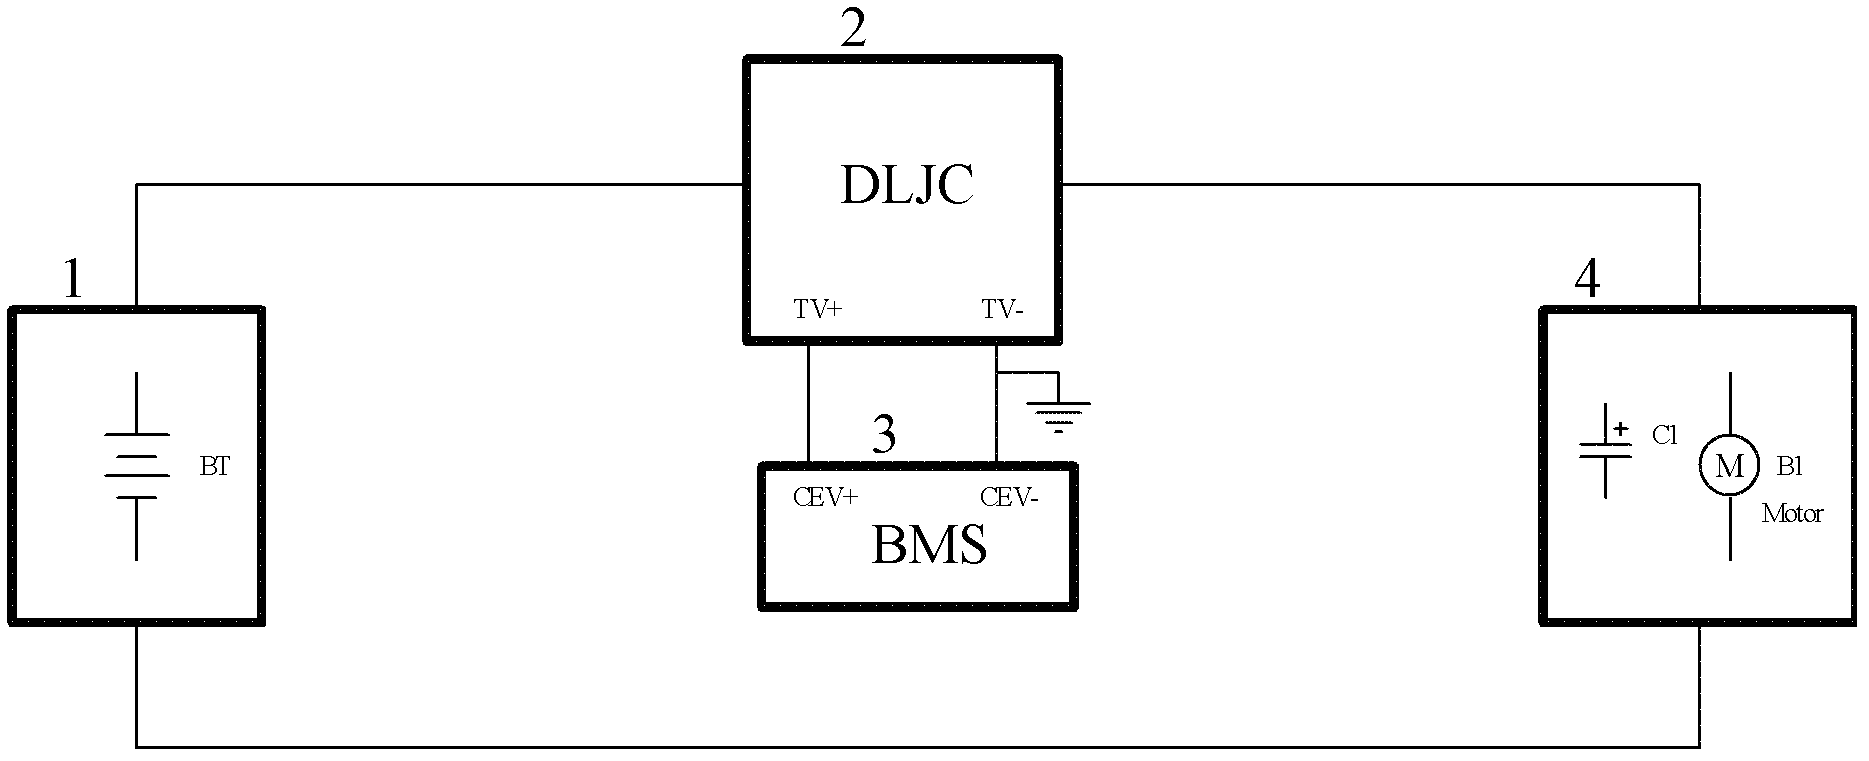 Method and device for double-precision SOC (state of charge) test of electric vehicle power battery